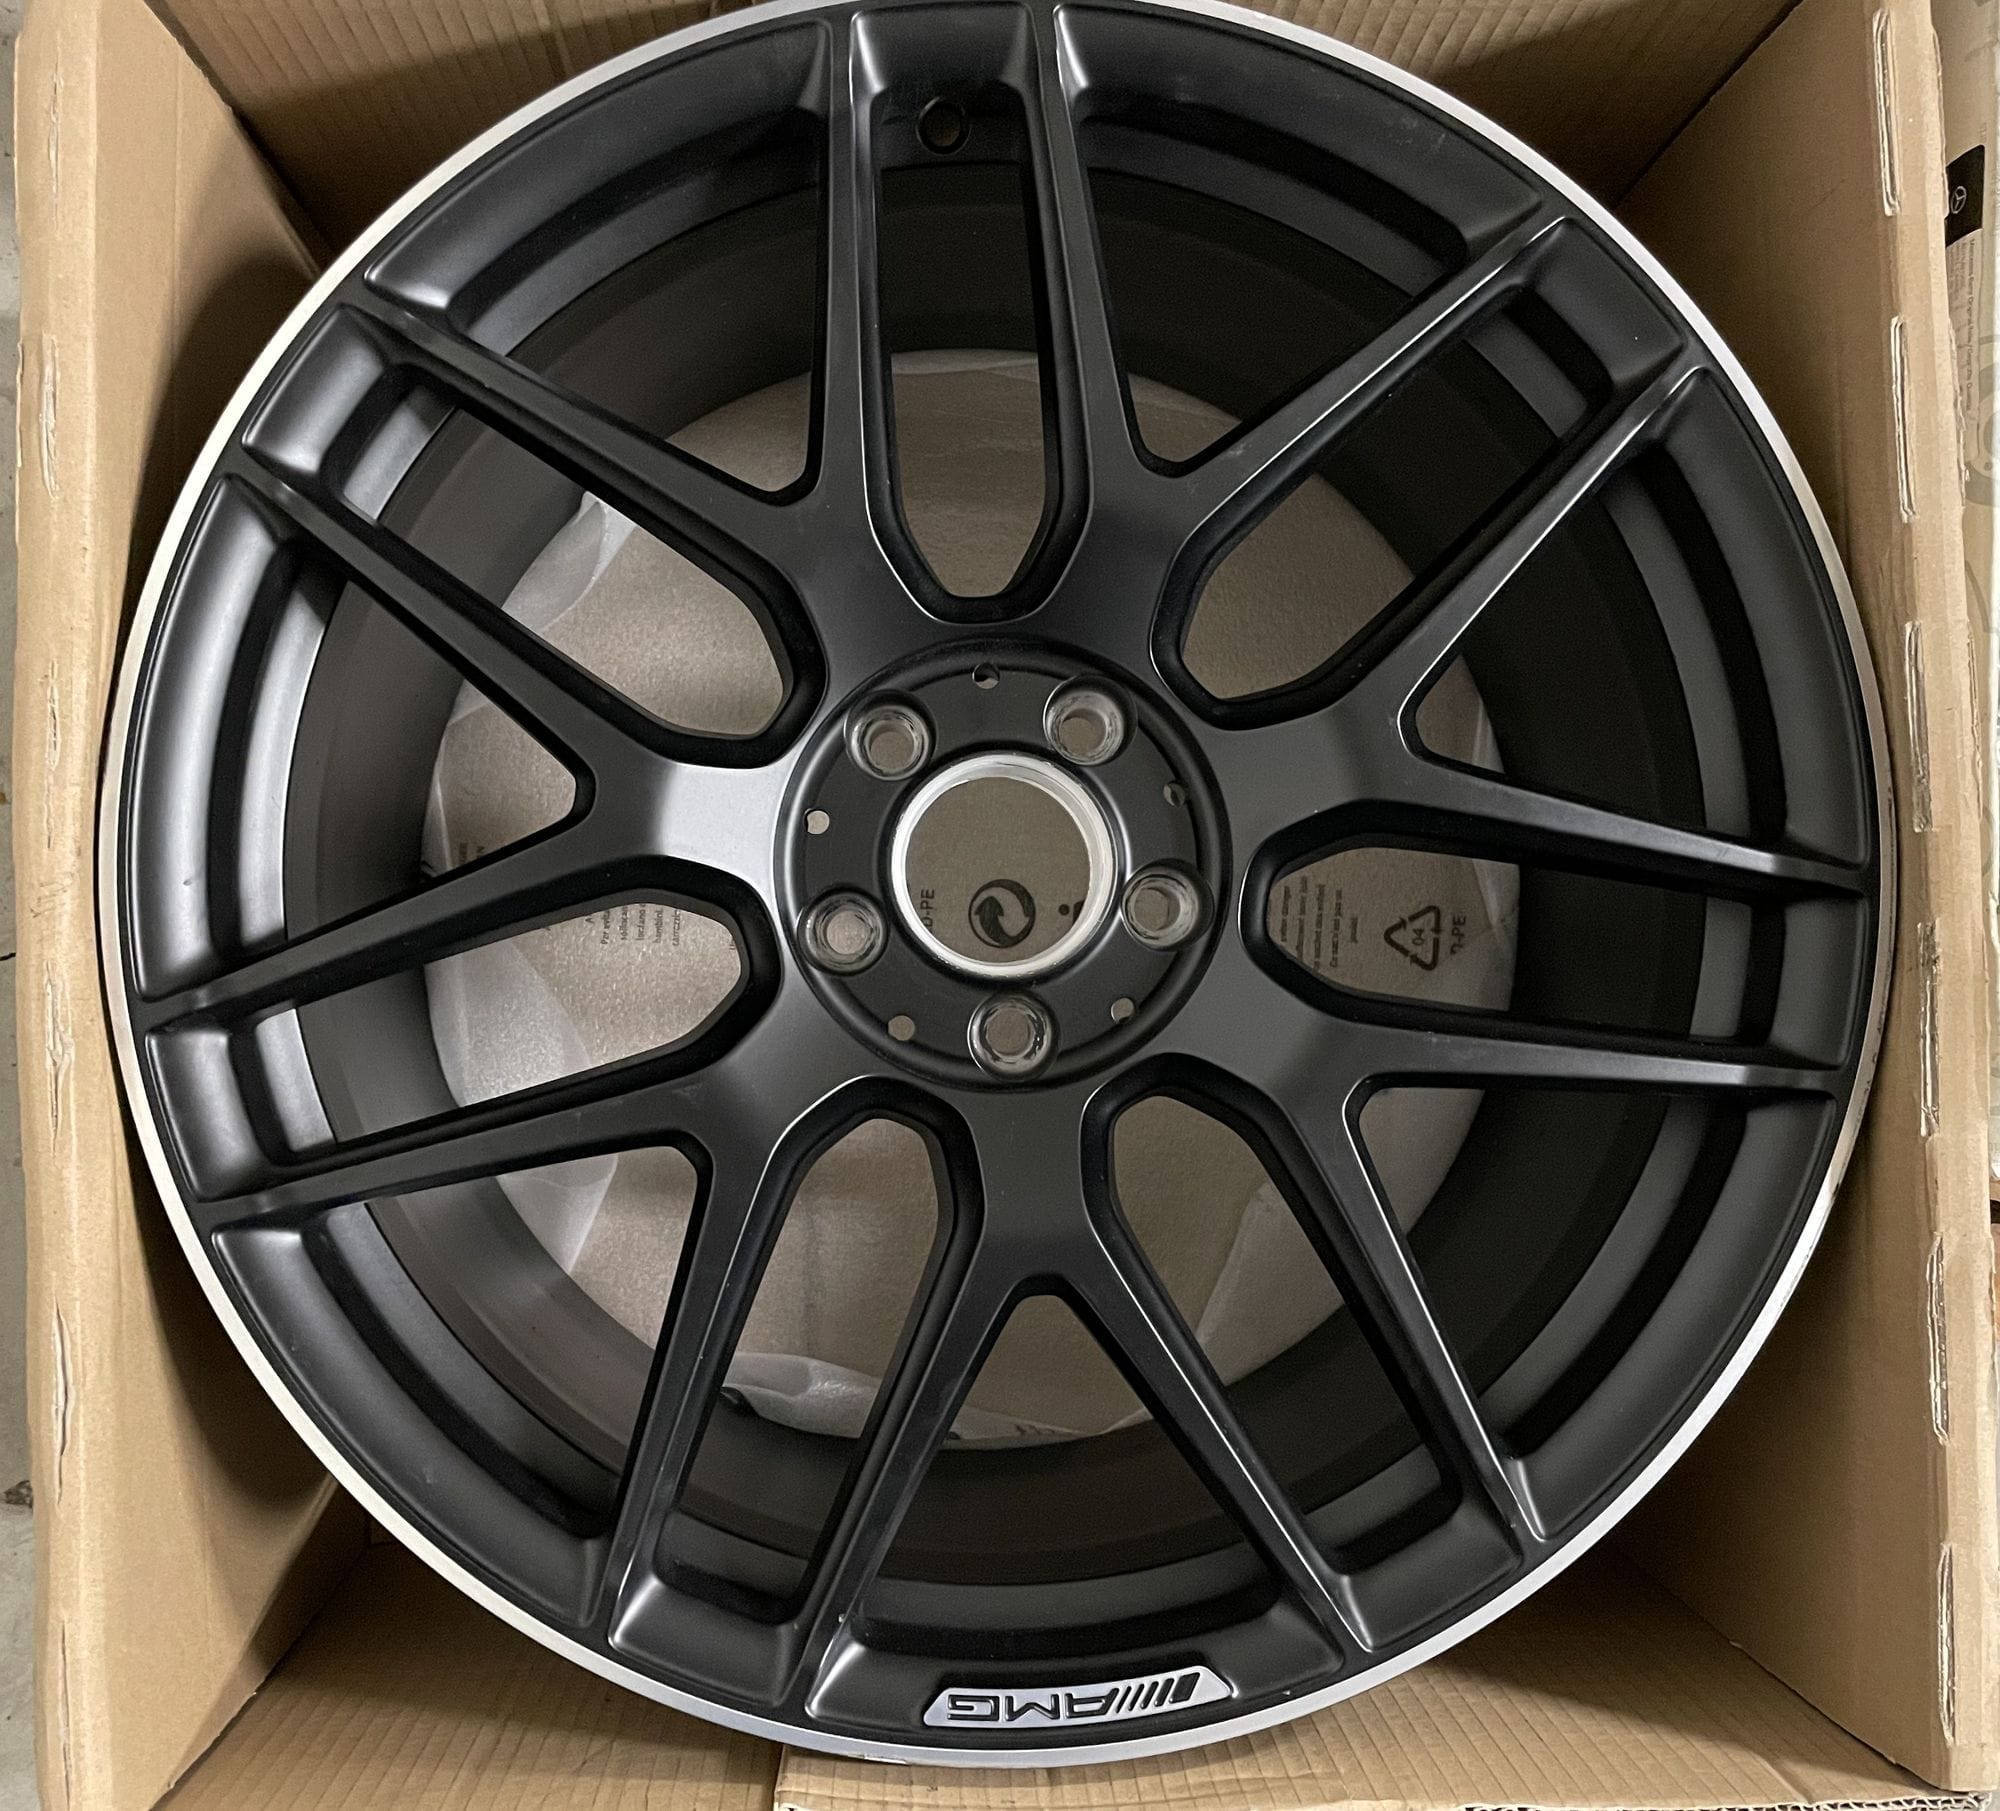 Wheels and Tires/Axles - WTB: 1x W213 E63 cross-spoke rear wheel (20x10) - Used - 2018 to 2022 Mercedes-Benz E63 AMG - Portland, OR 97229, United States